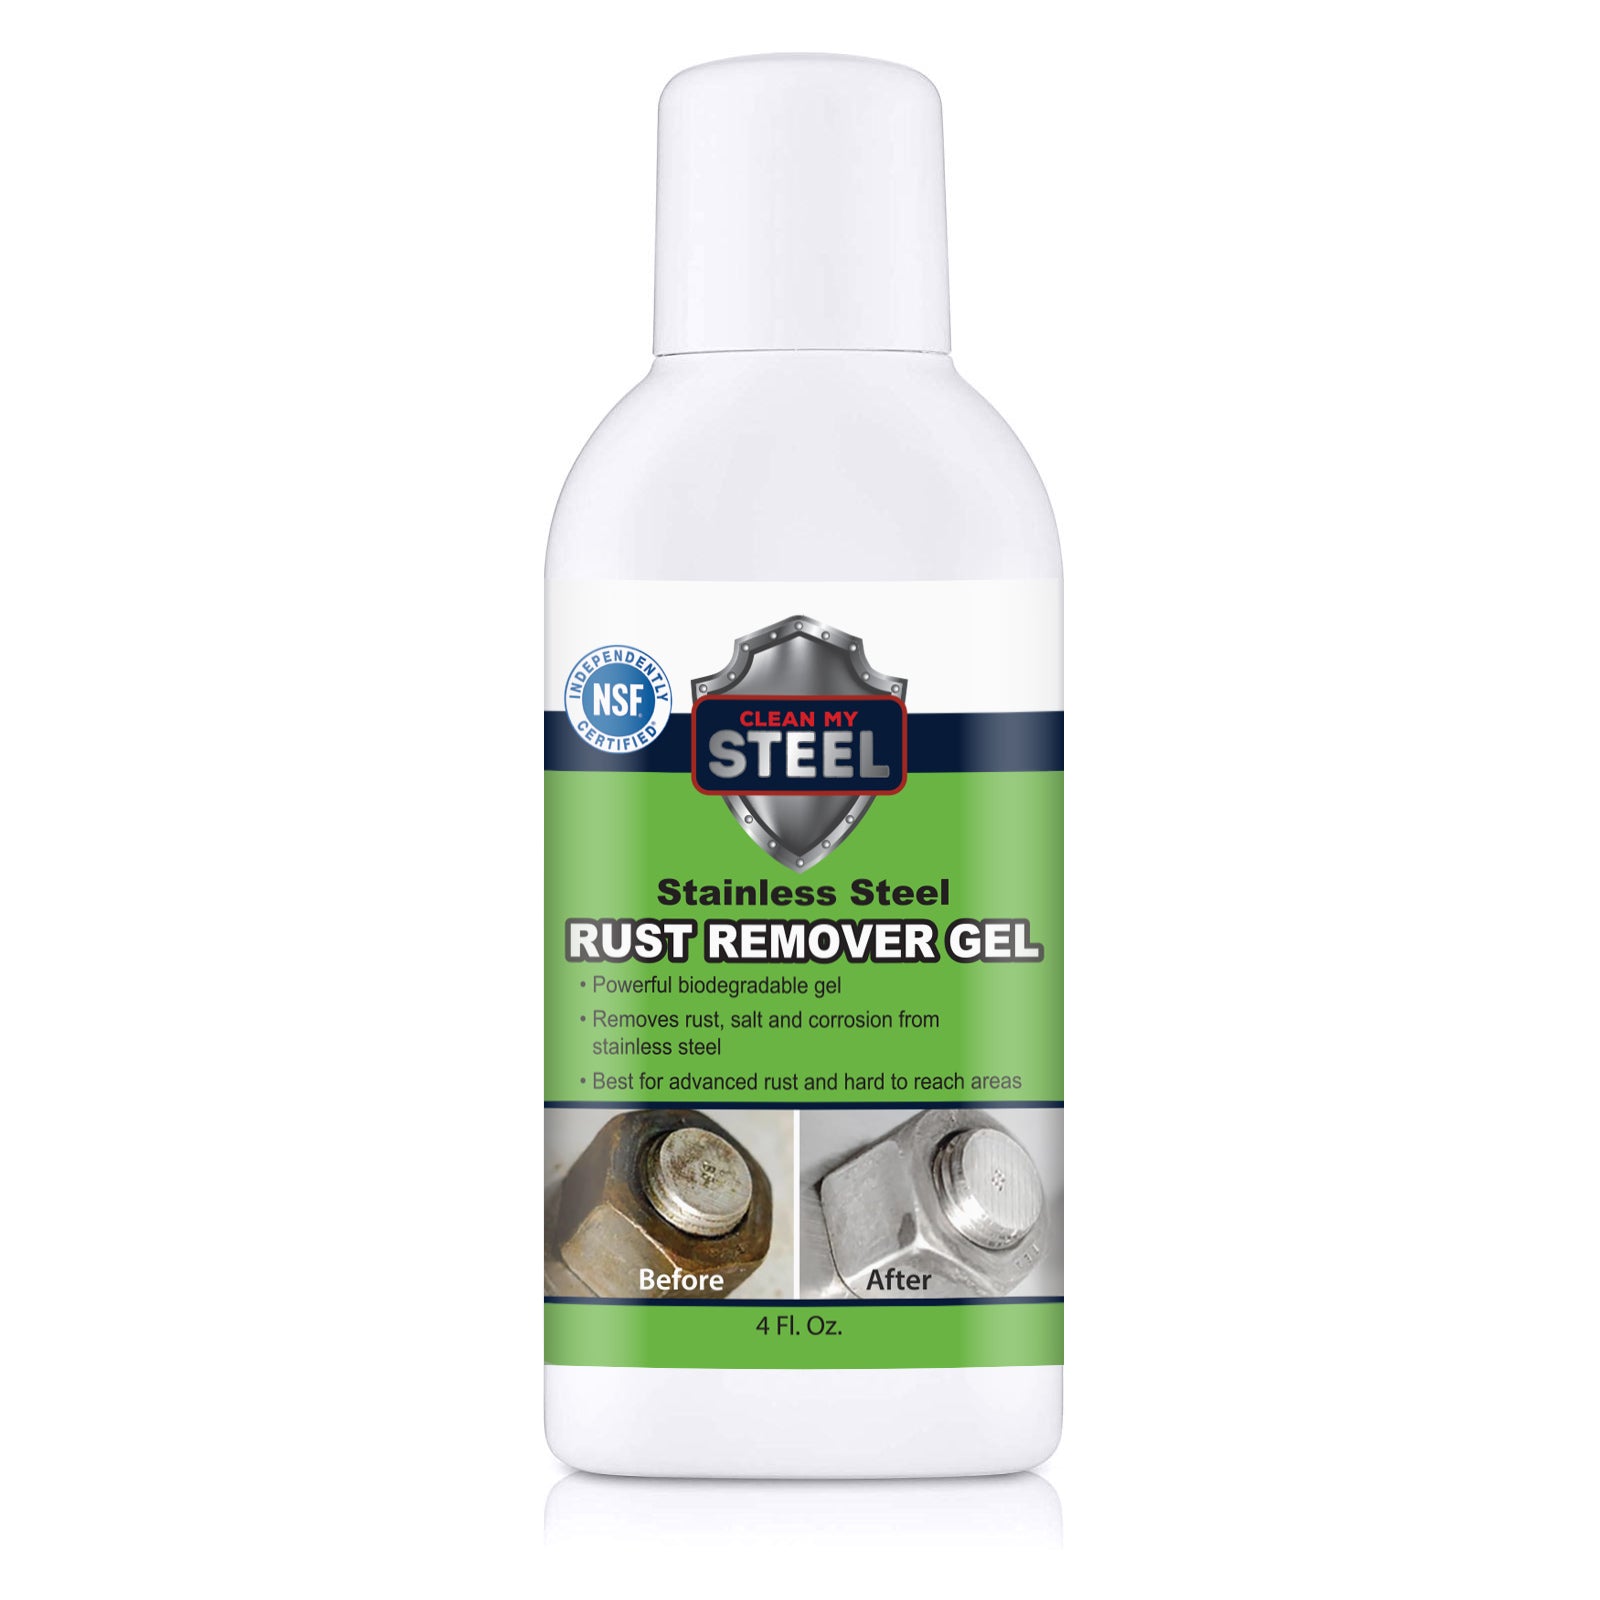 Rust remover for removing rust from steel